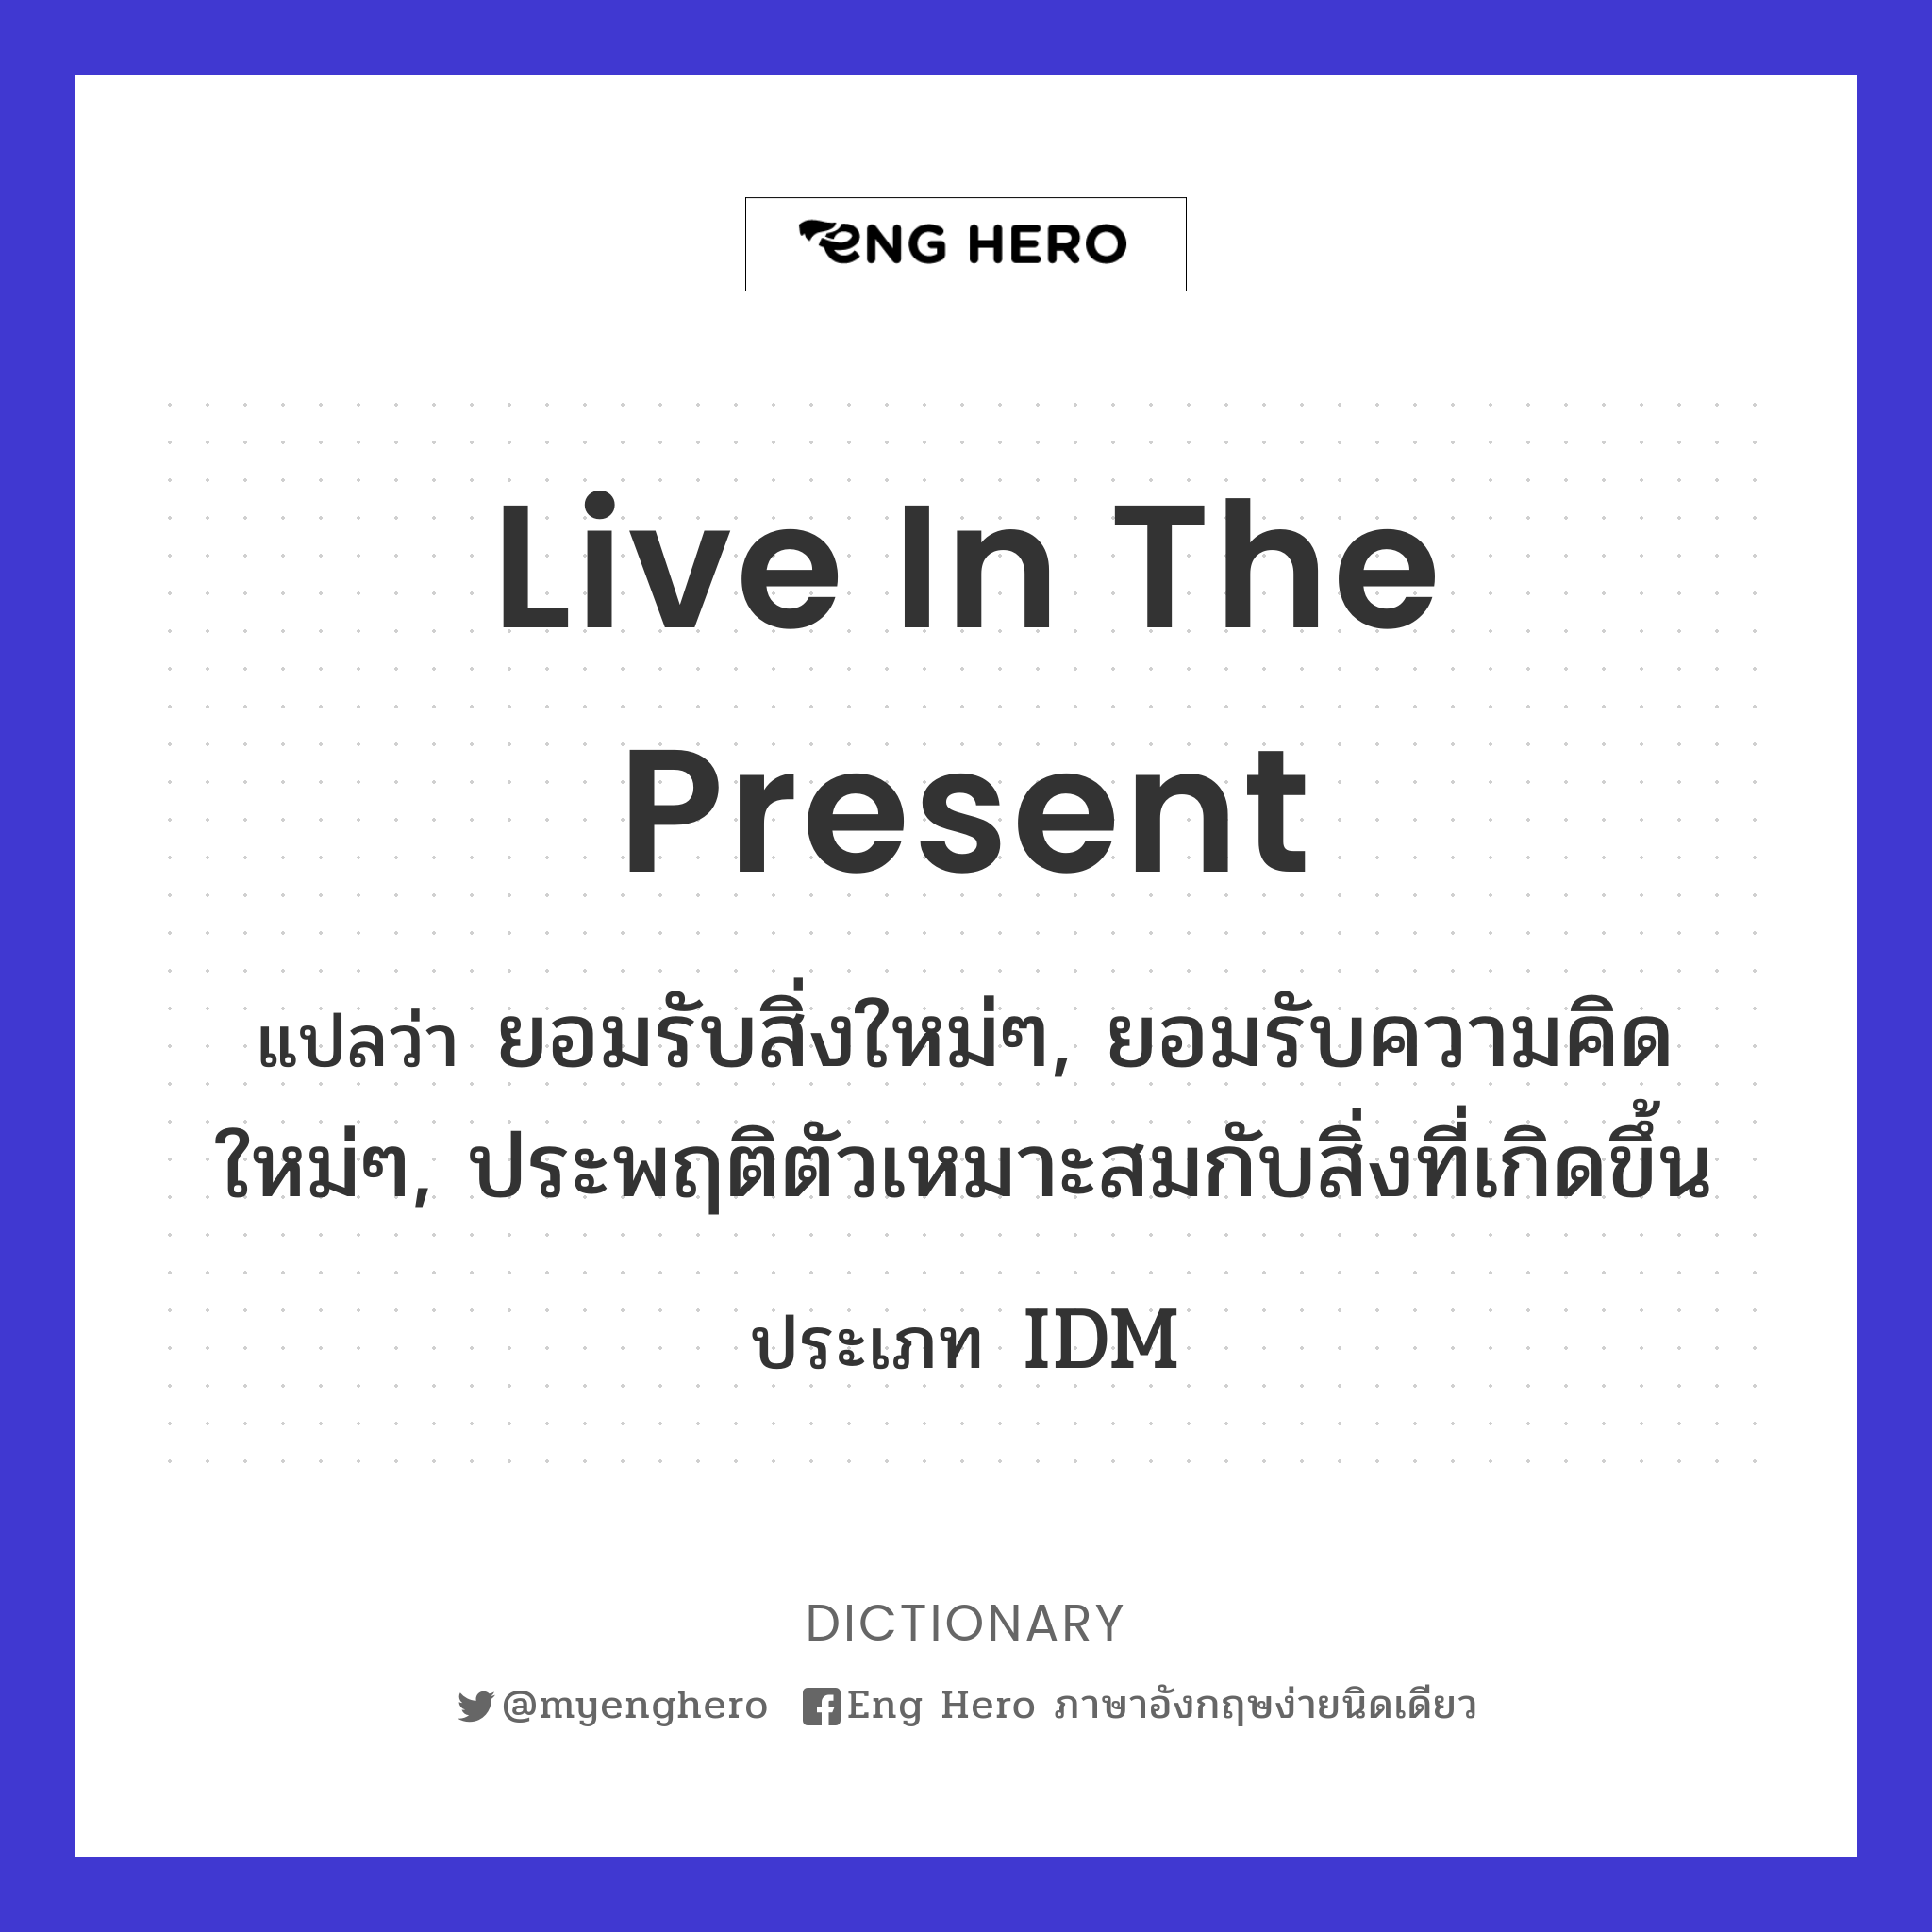 live in the present